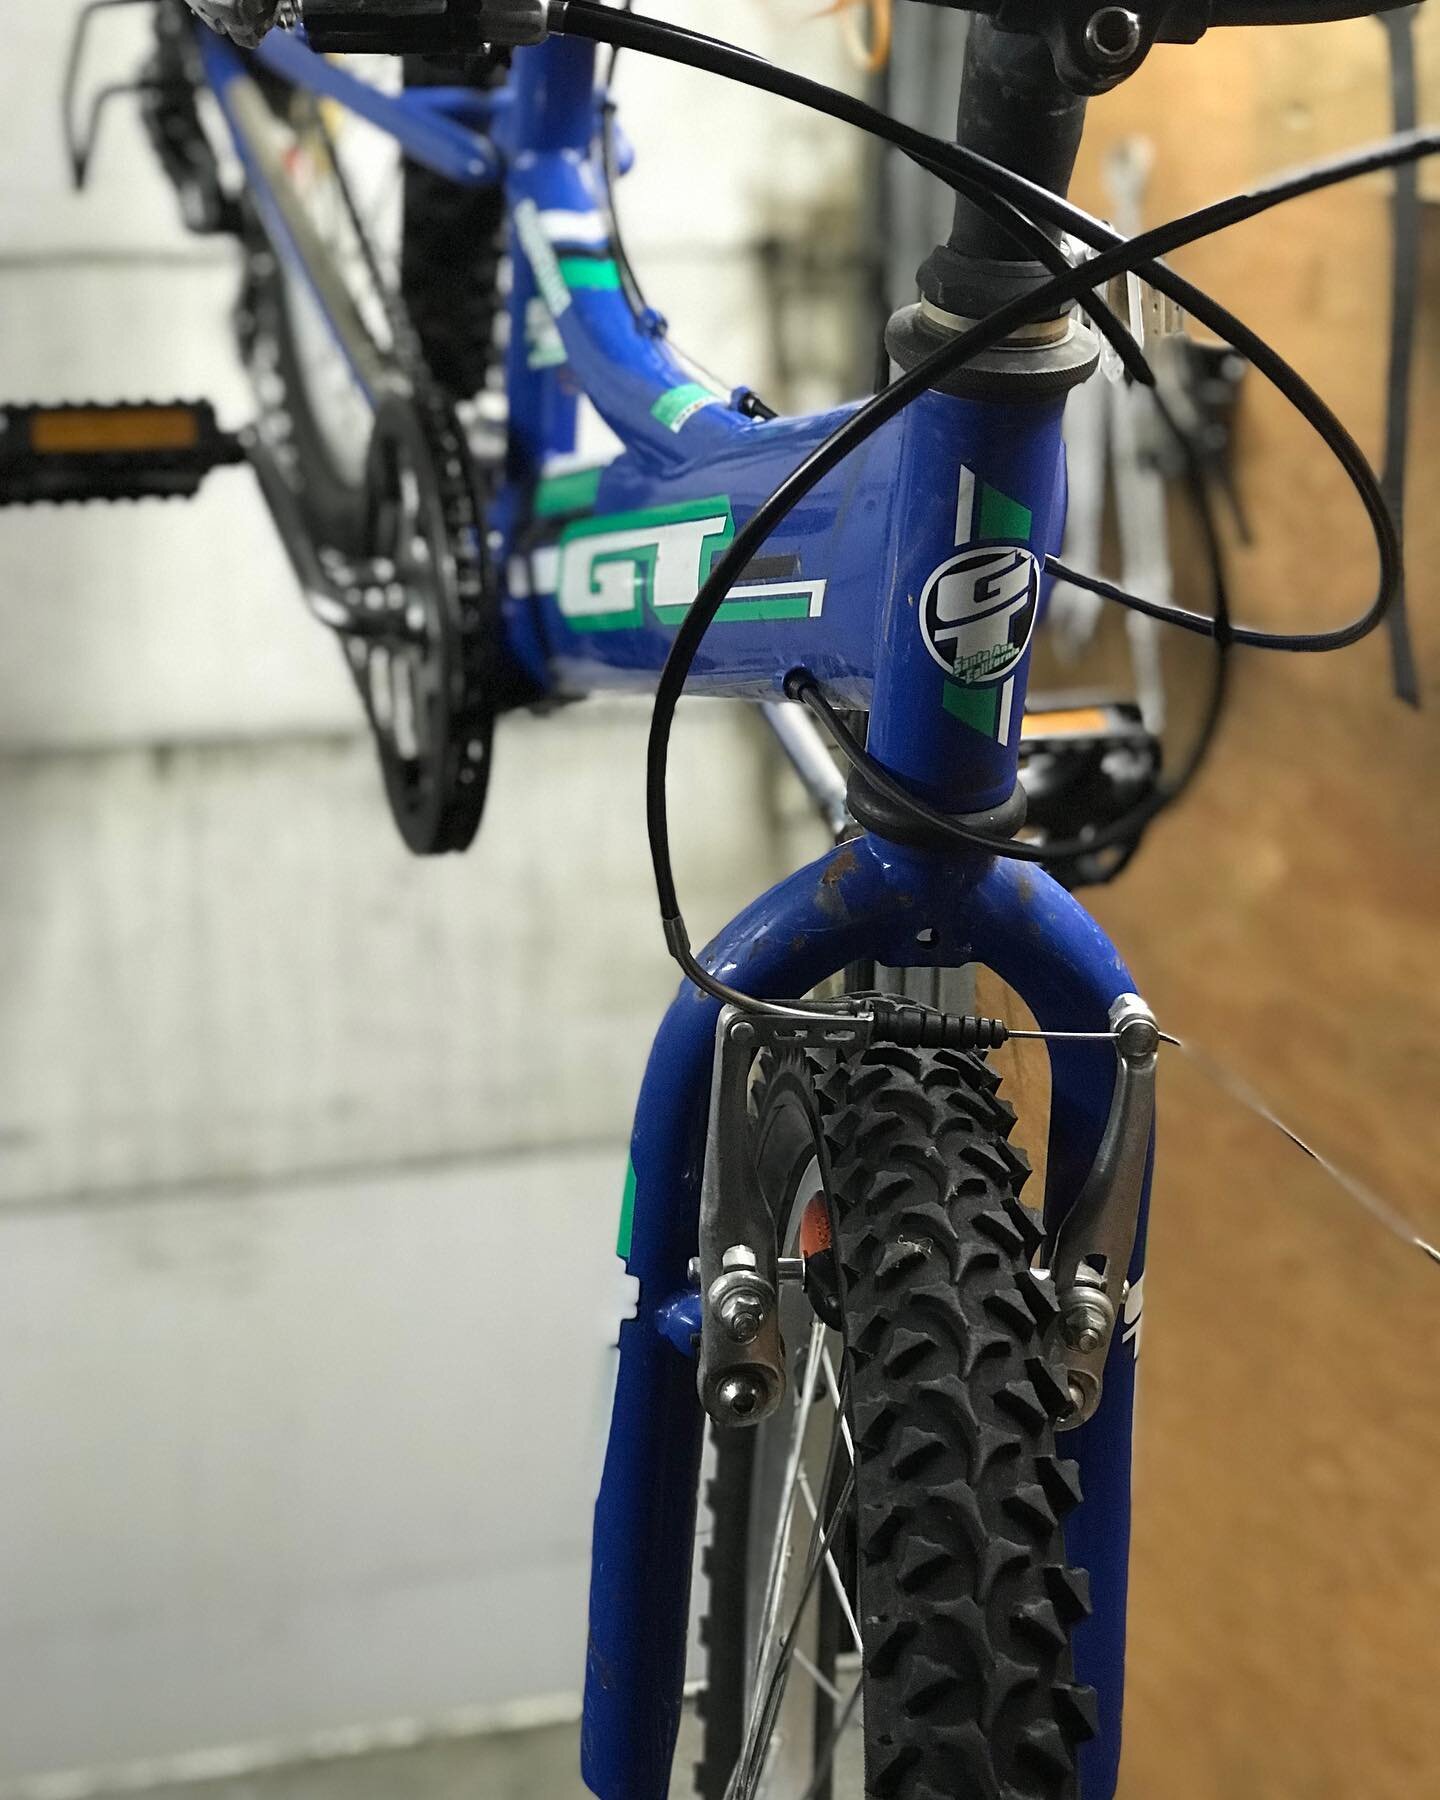 Cleaning up kids bikes for spring! Do you have a family of bikes that need service? Give me a call and save yourself the trouble of loading them all up.